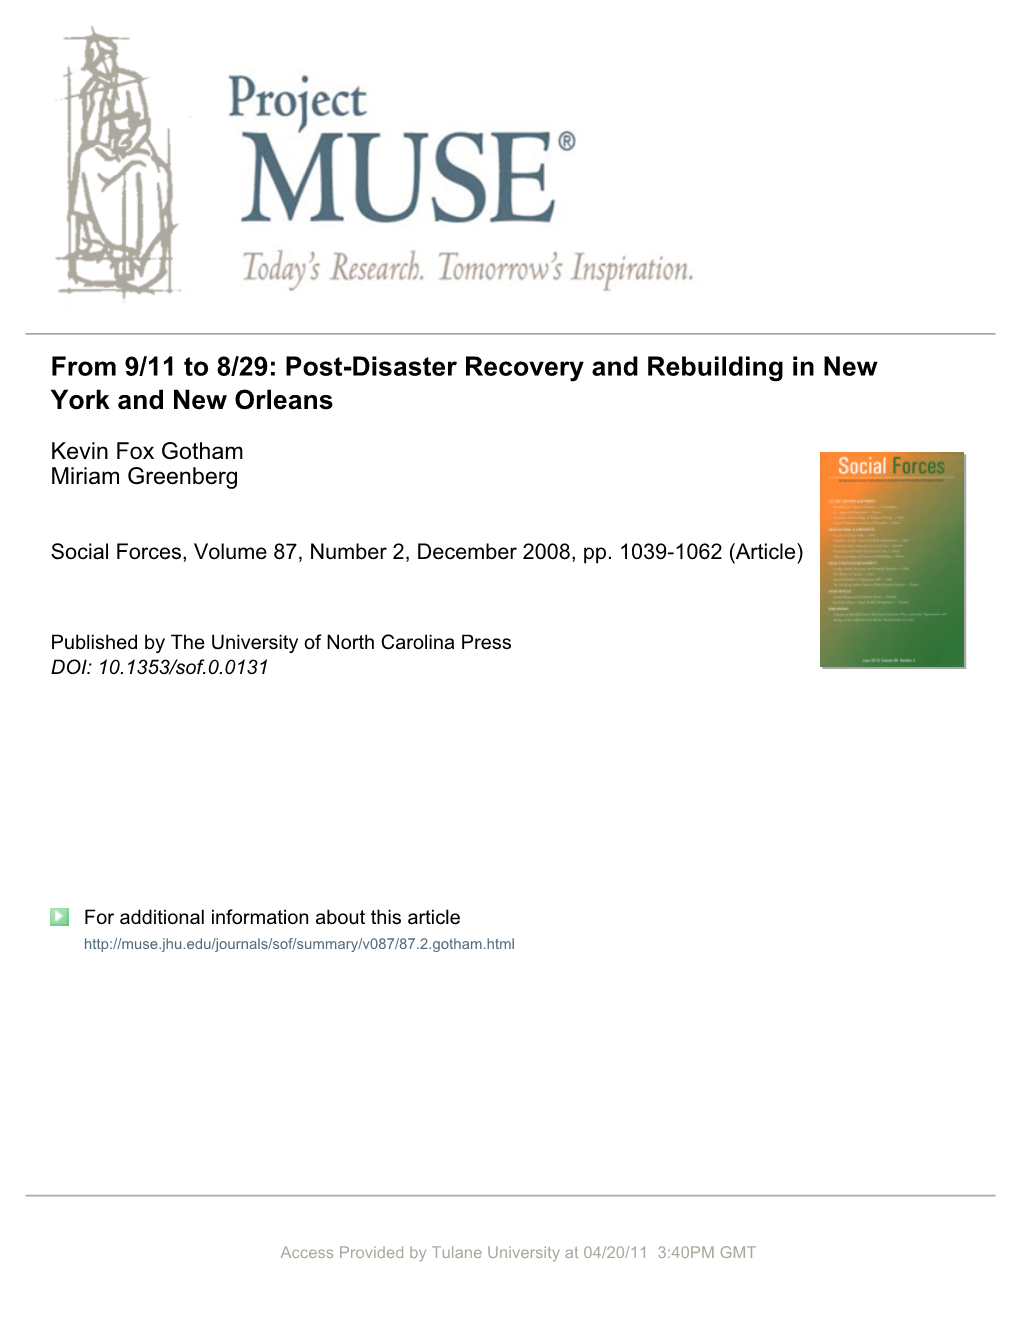 From 9/11 to 8/29: Post-Disaster Recovery and Rebuilding in New York and New Orleans